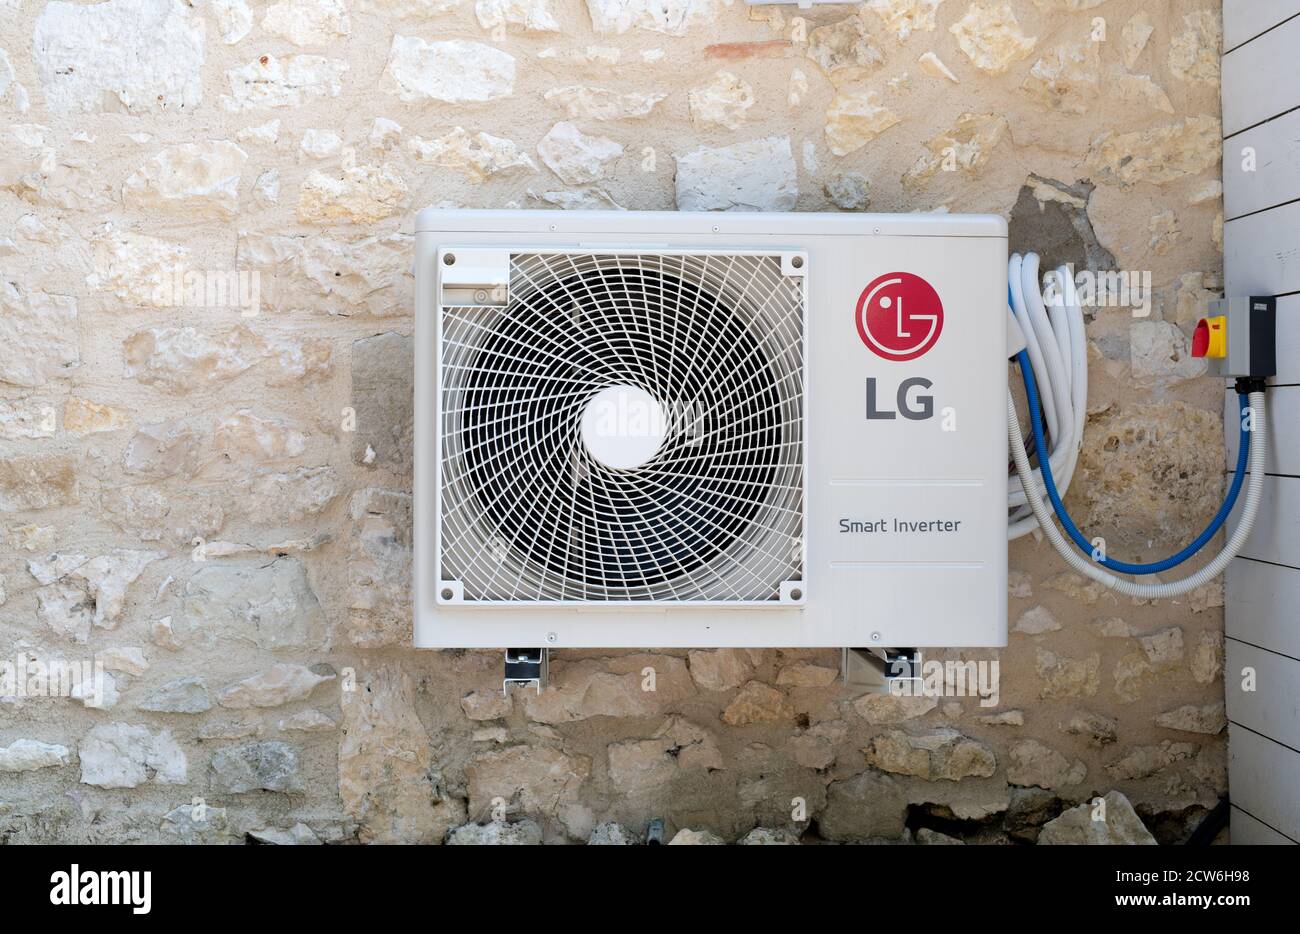 Bergerac, France July 2020: An LG smart inverter mounted on the stone wall of a house Stock Photo